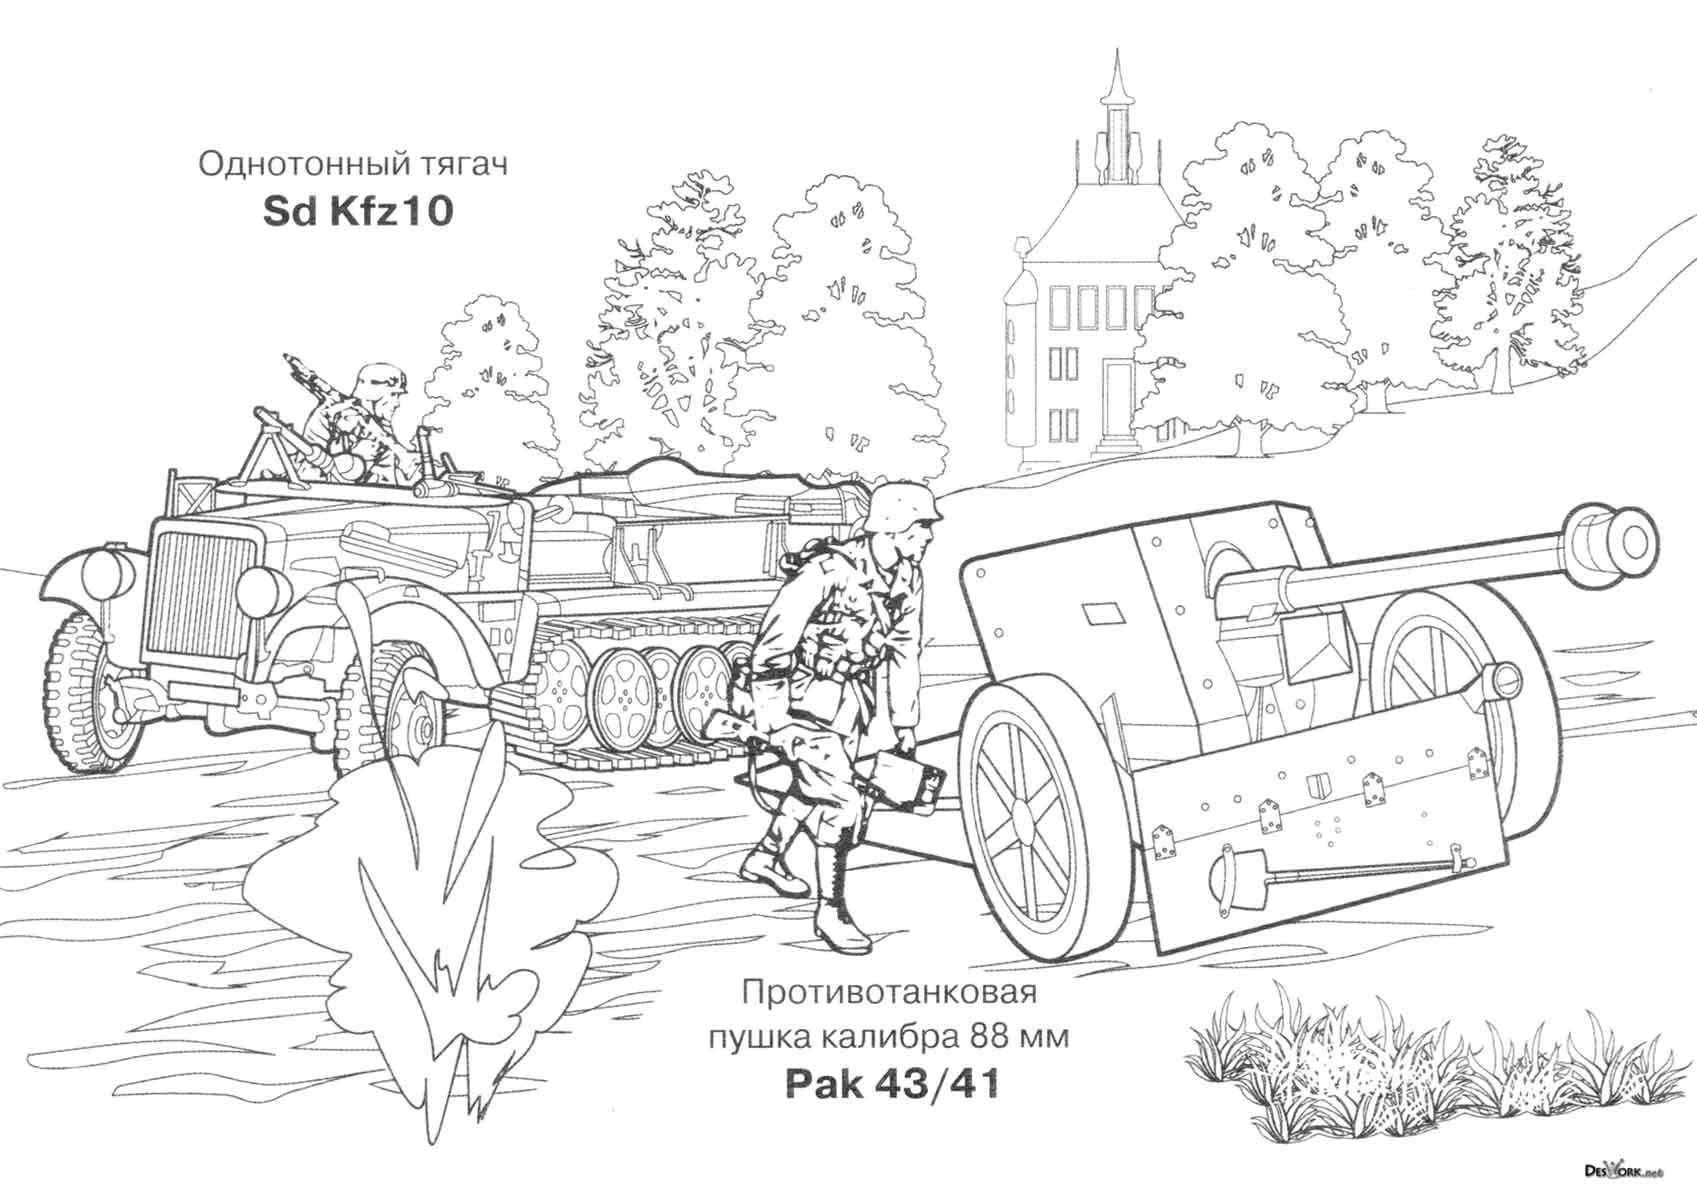 Coloring Military equipment. Category coloring. Tags:  military technology, war, machinery.